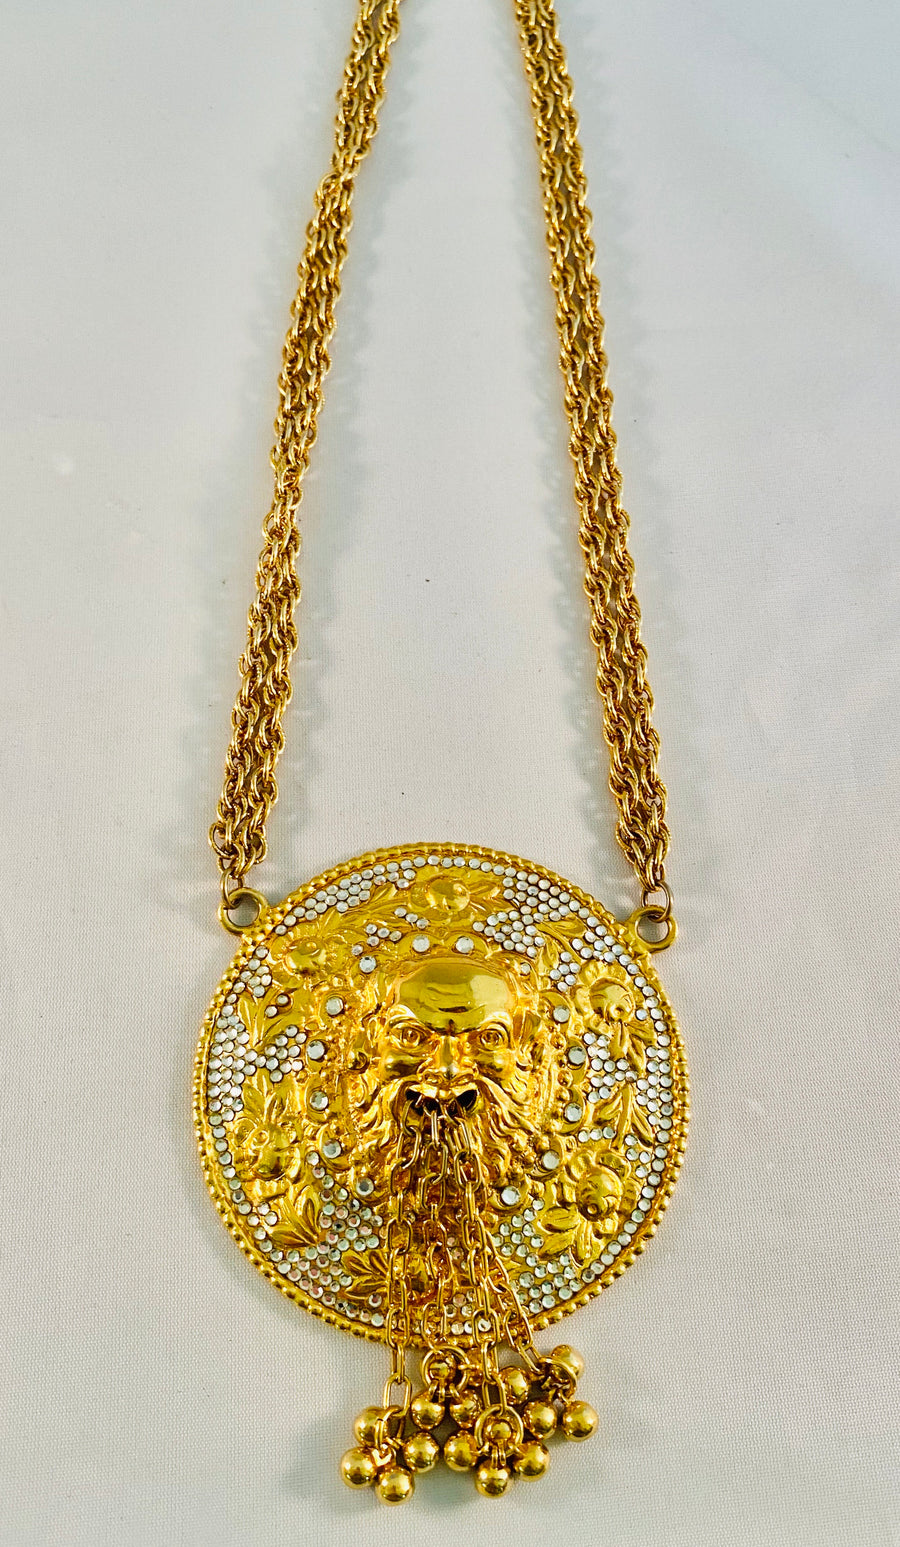 Judith Leiber Necklace